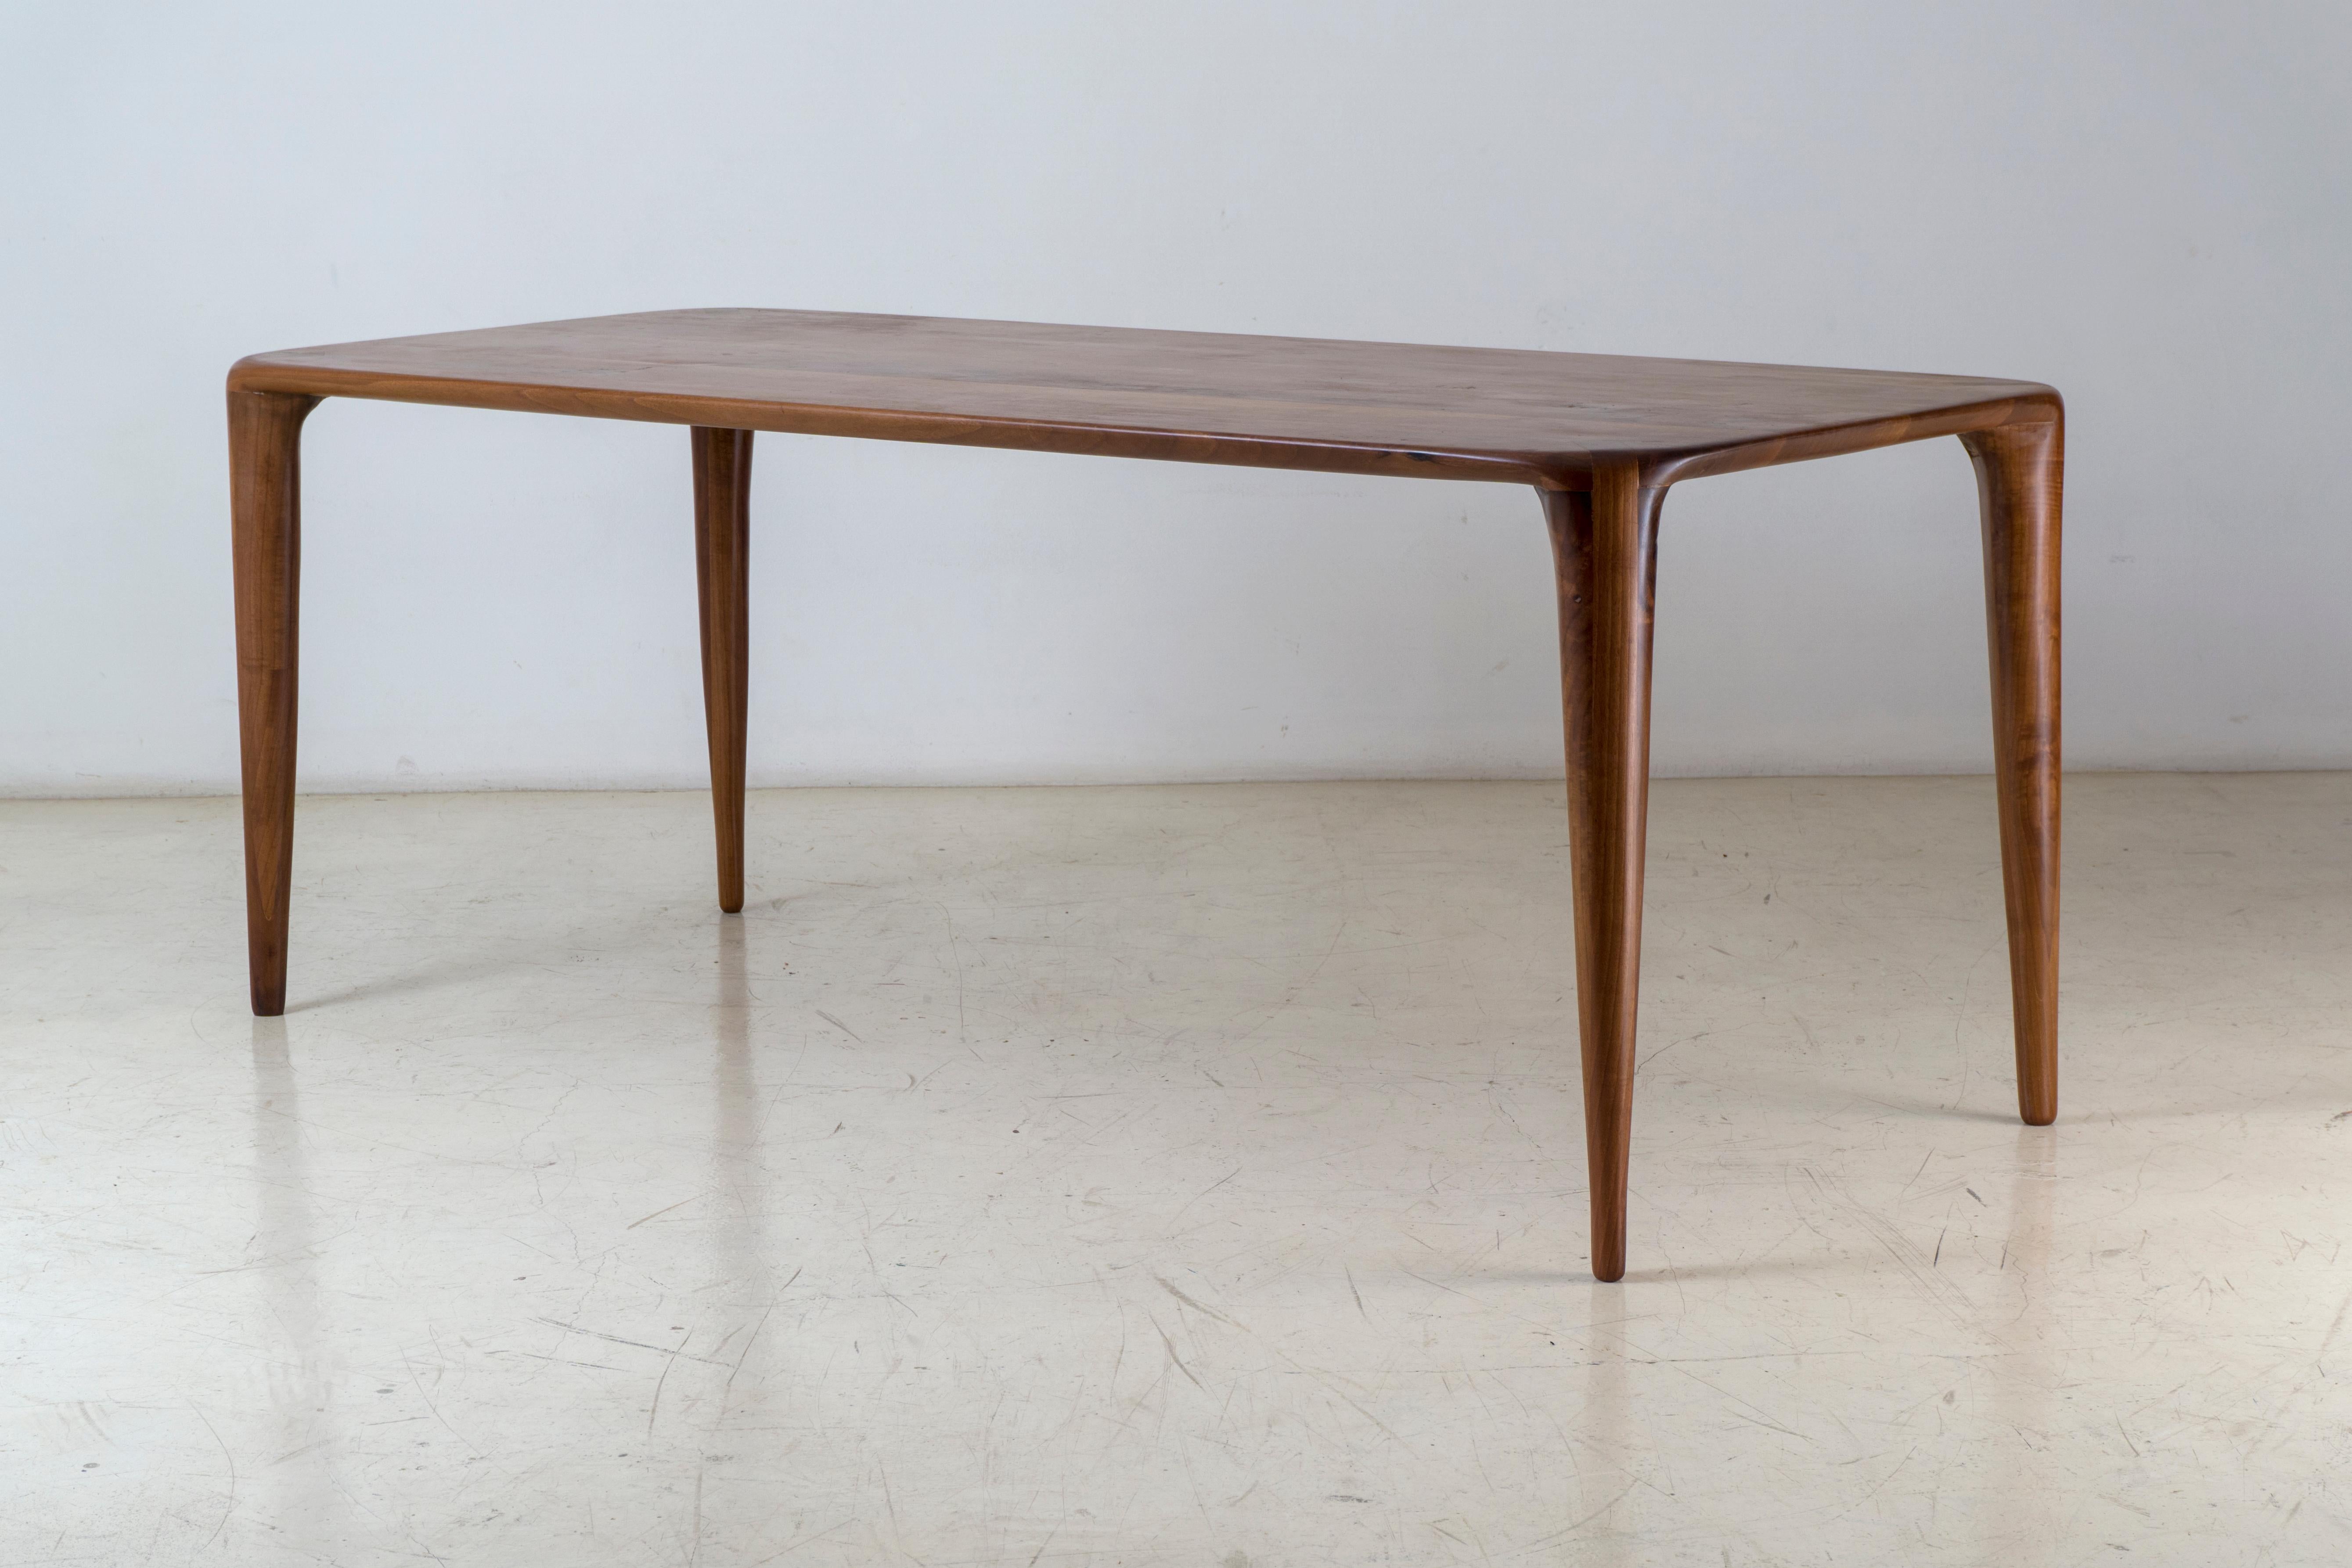 This is the S_dining table designed and handcrafted by Tommaso Garavini. It's made of solid Italian Walnut, and it has been created using no screws. 
S_ stands for Sensuality which was the main inspiration that leaded the creation of this unique